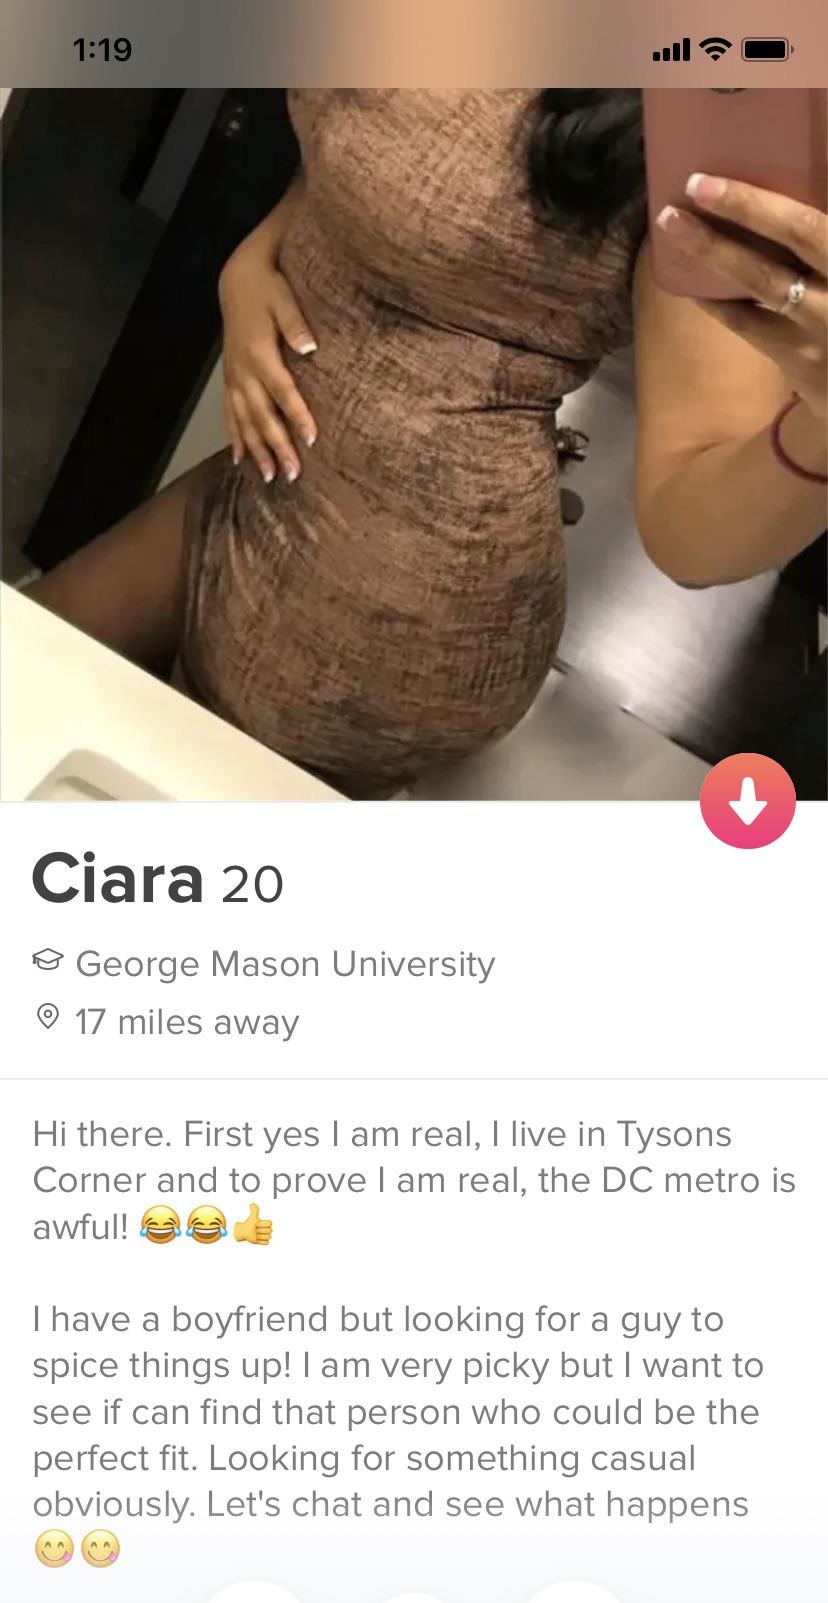 Ciara 20 o George Mason University 17 miles away Hi there. First yes I am real, I live in Tysons Corner and to prove I am real, the Dc metro is awful! Thave a boyfriend but looking for a guy to spice things up! I am very picky but I want to see if can fin